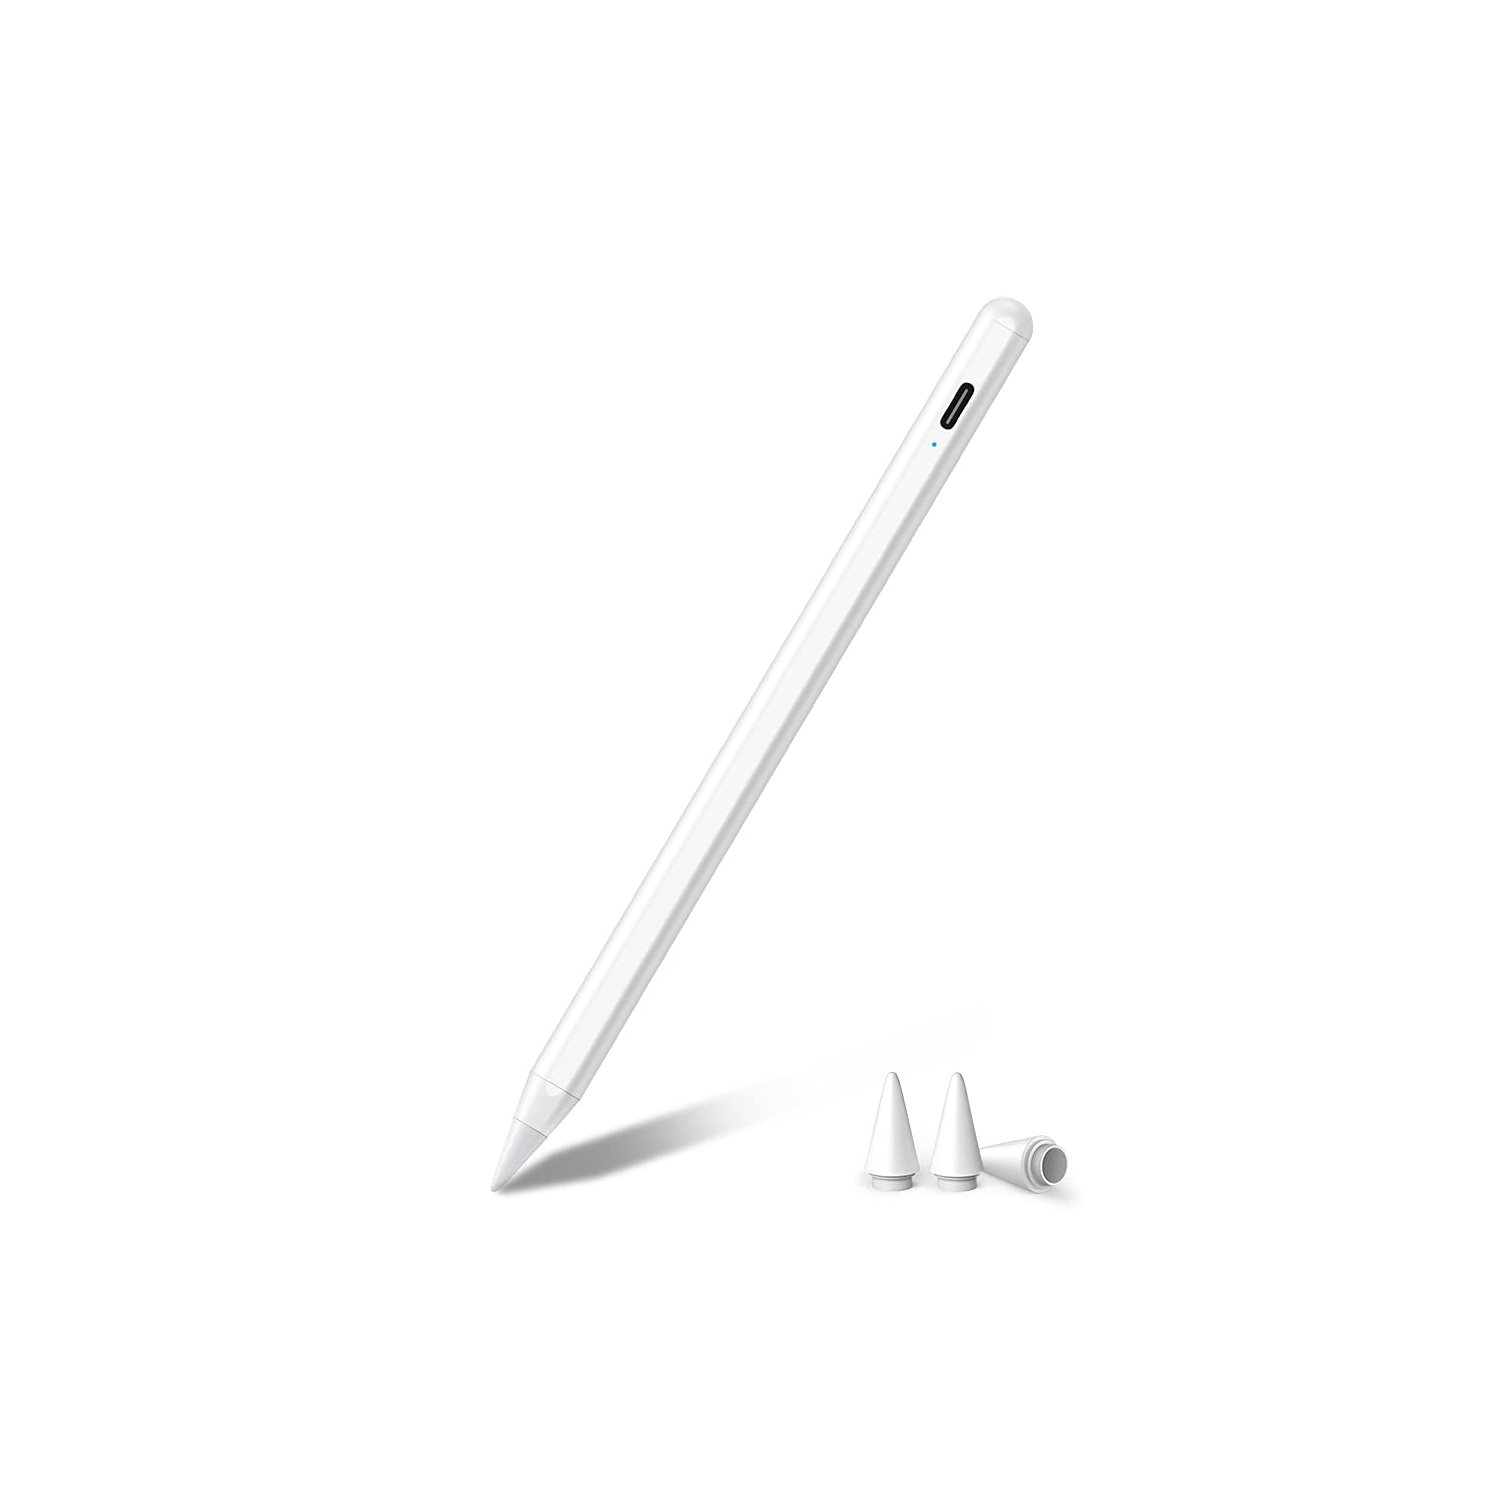 Stylus Pen for iPad with Palm Rejection, JAMJAKE Active Pencil Compatible with (2018-2020) iPad Pro (11/12.9 Inch),iPad 6/7/